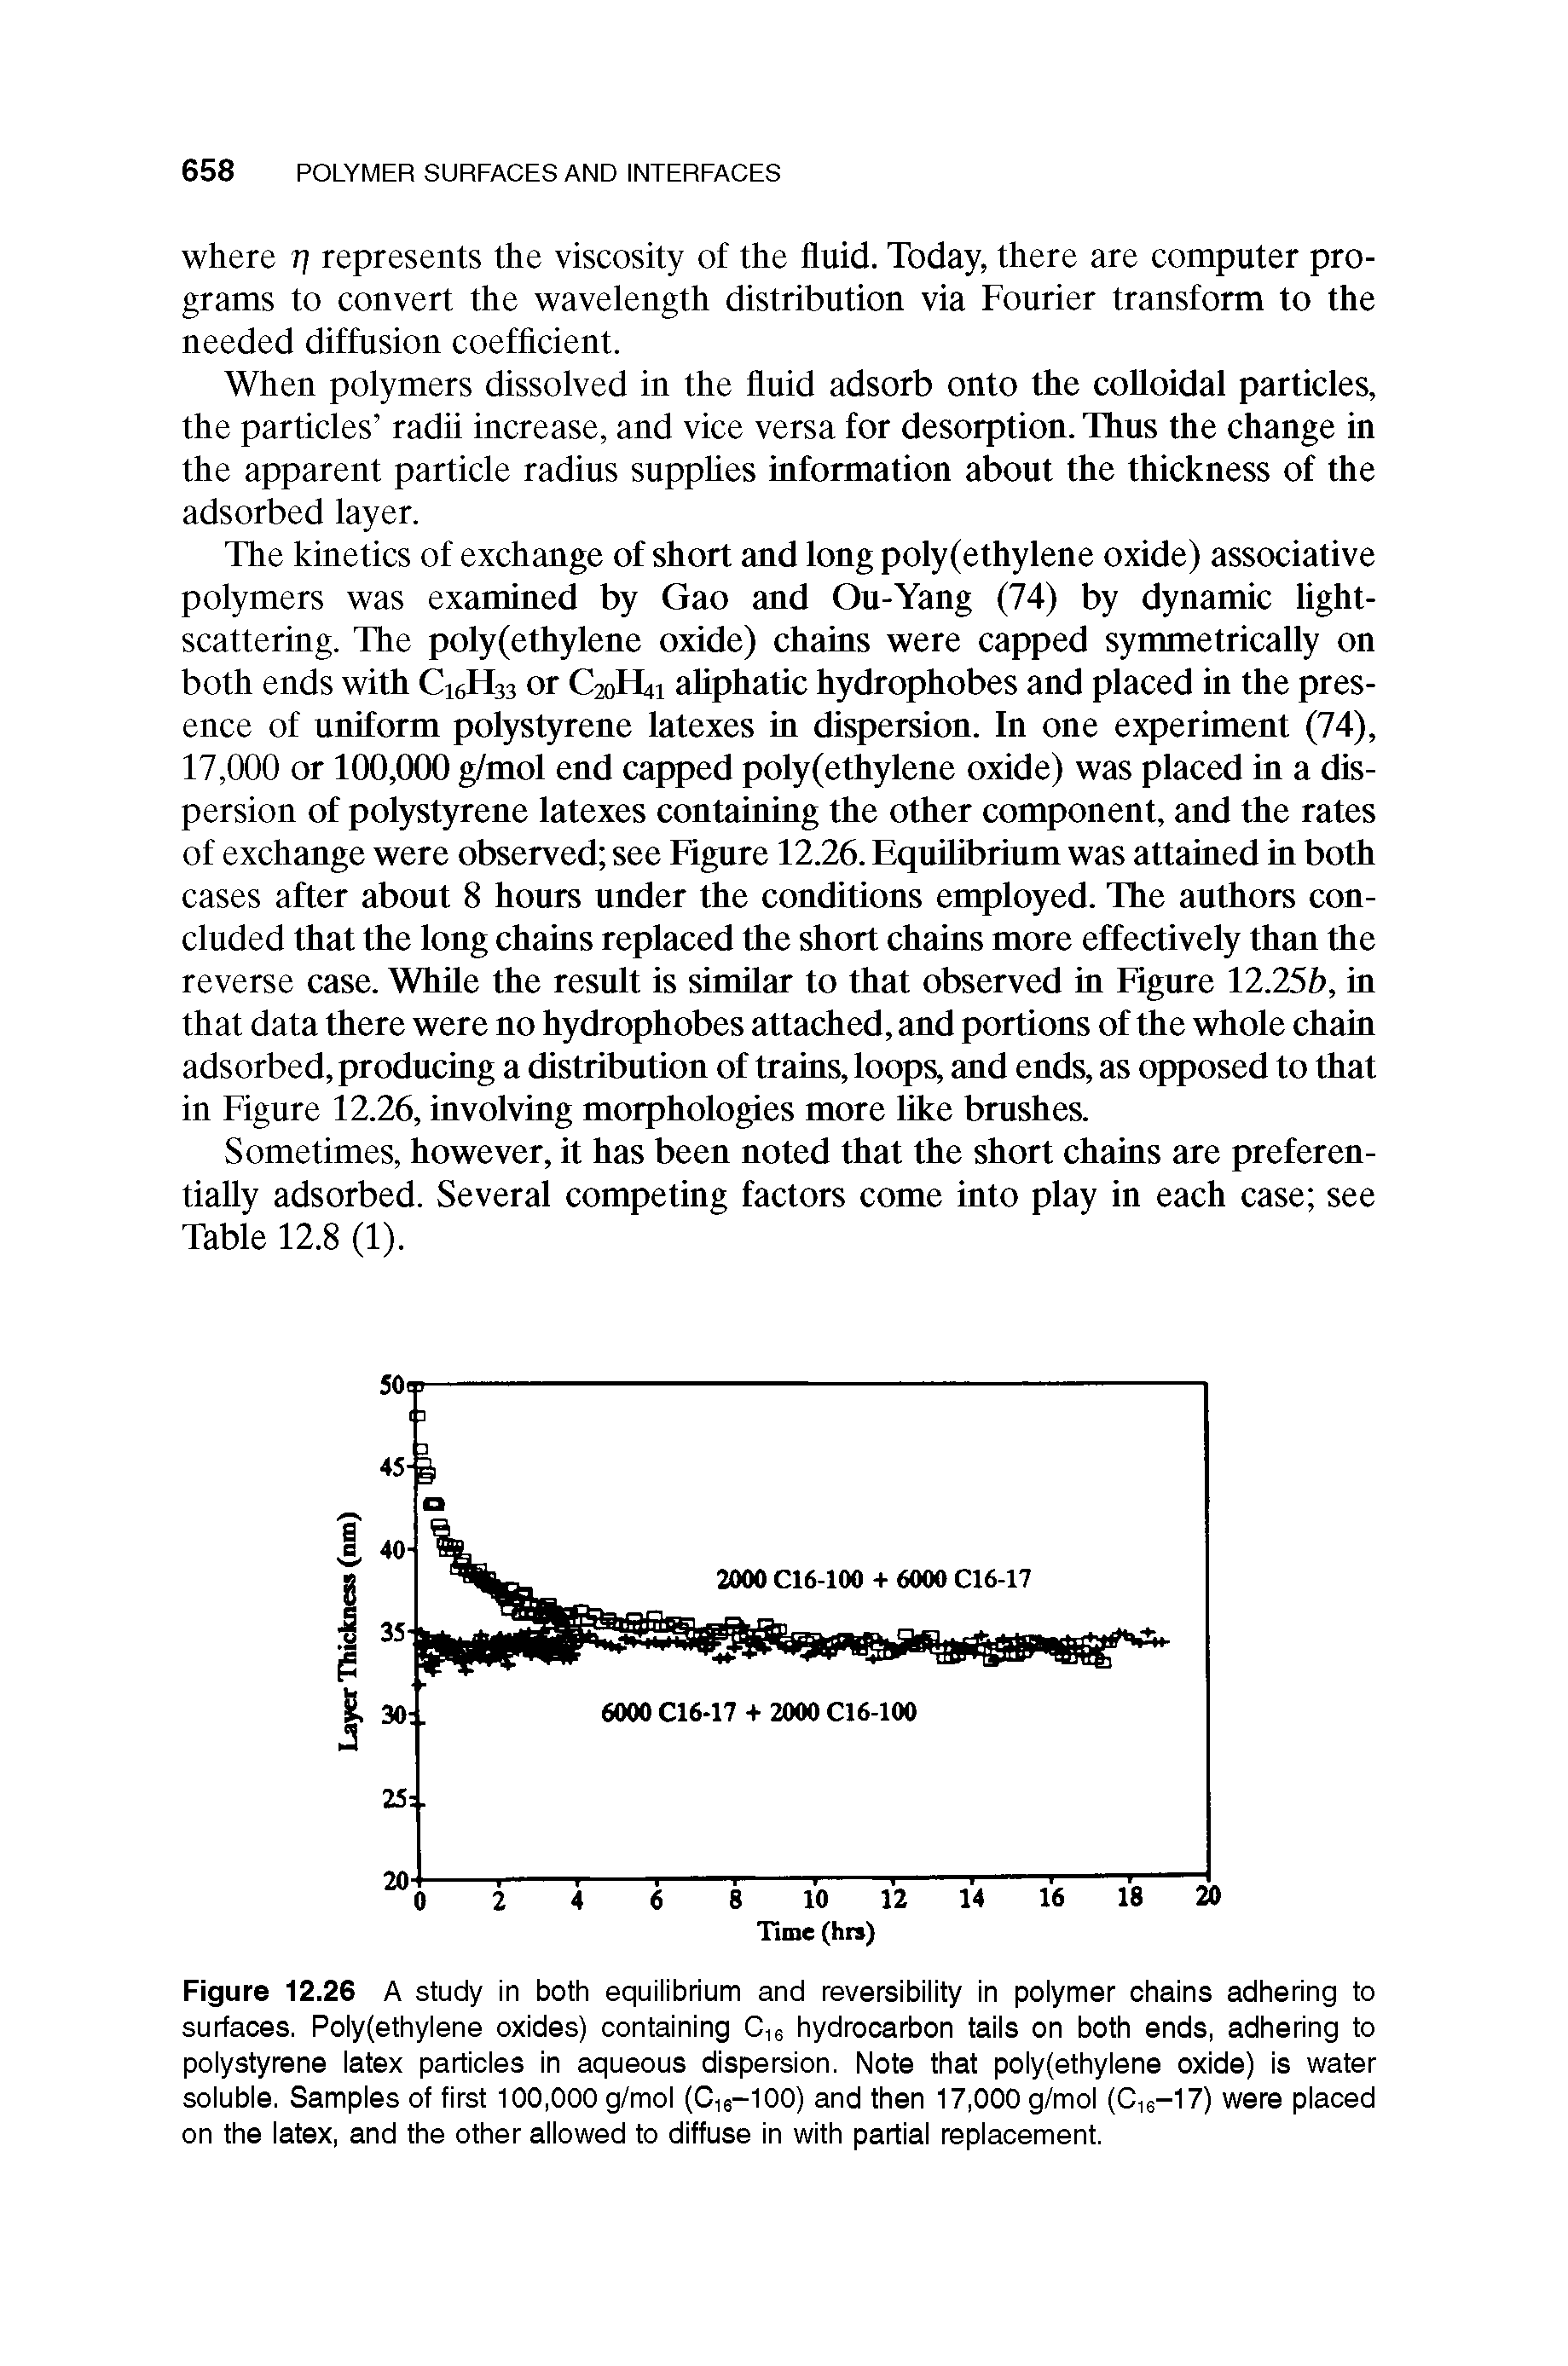 Figure 12.26 A study in both equilibrium and reversibility in polymer chains adhering to surfaces. Poly(ethylene oxides) containing C,s hydrocarbon tails on both ends, adhering to polystyrene latex particles in aqueous dispersion. Note that poly(ethylene oxide) is water soluble. Samples of first 100,000 g/mol (Cie-100) and then 17,000 g/mol (0,6-17) were placed on the latex, and the other allowed to diffuse in with partial replacement.